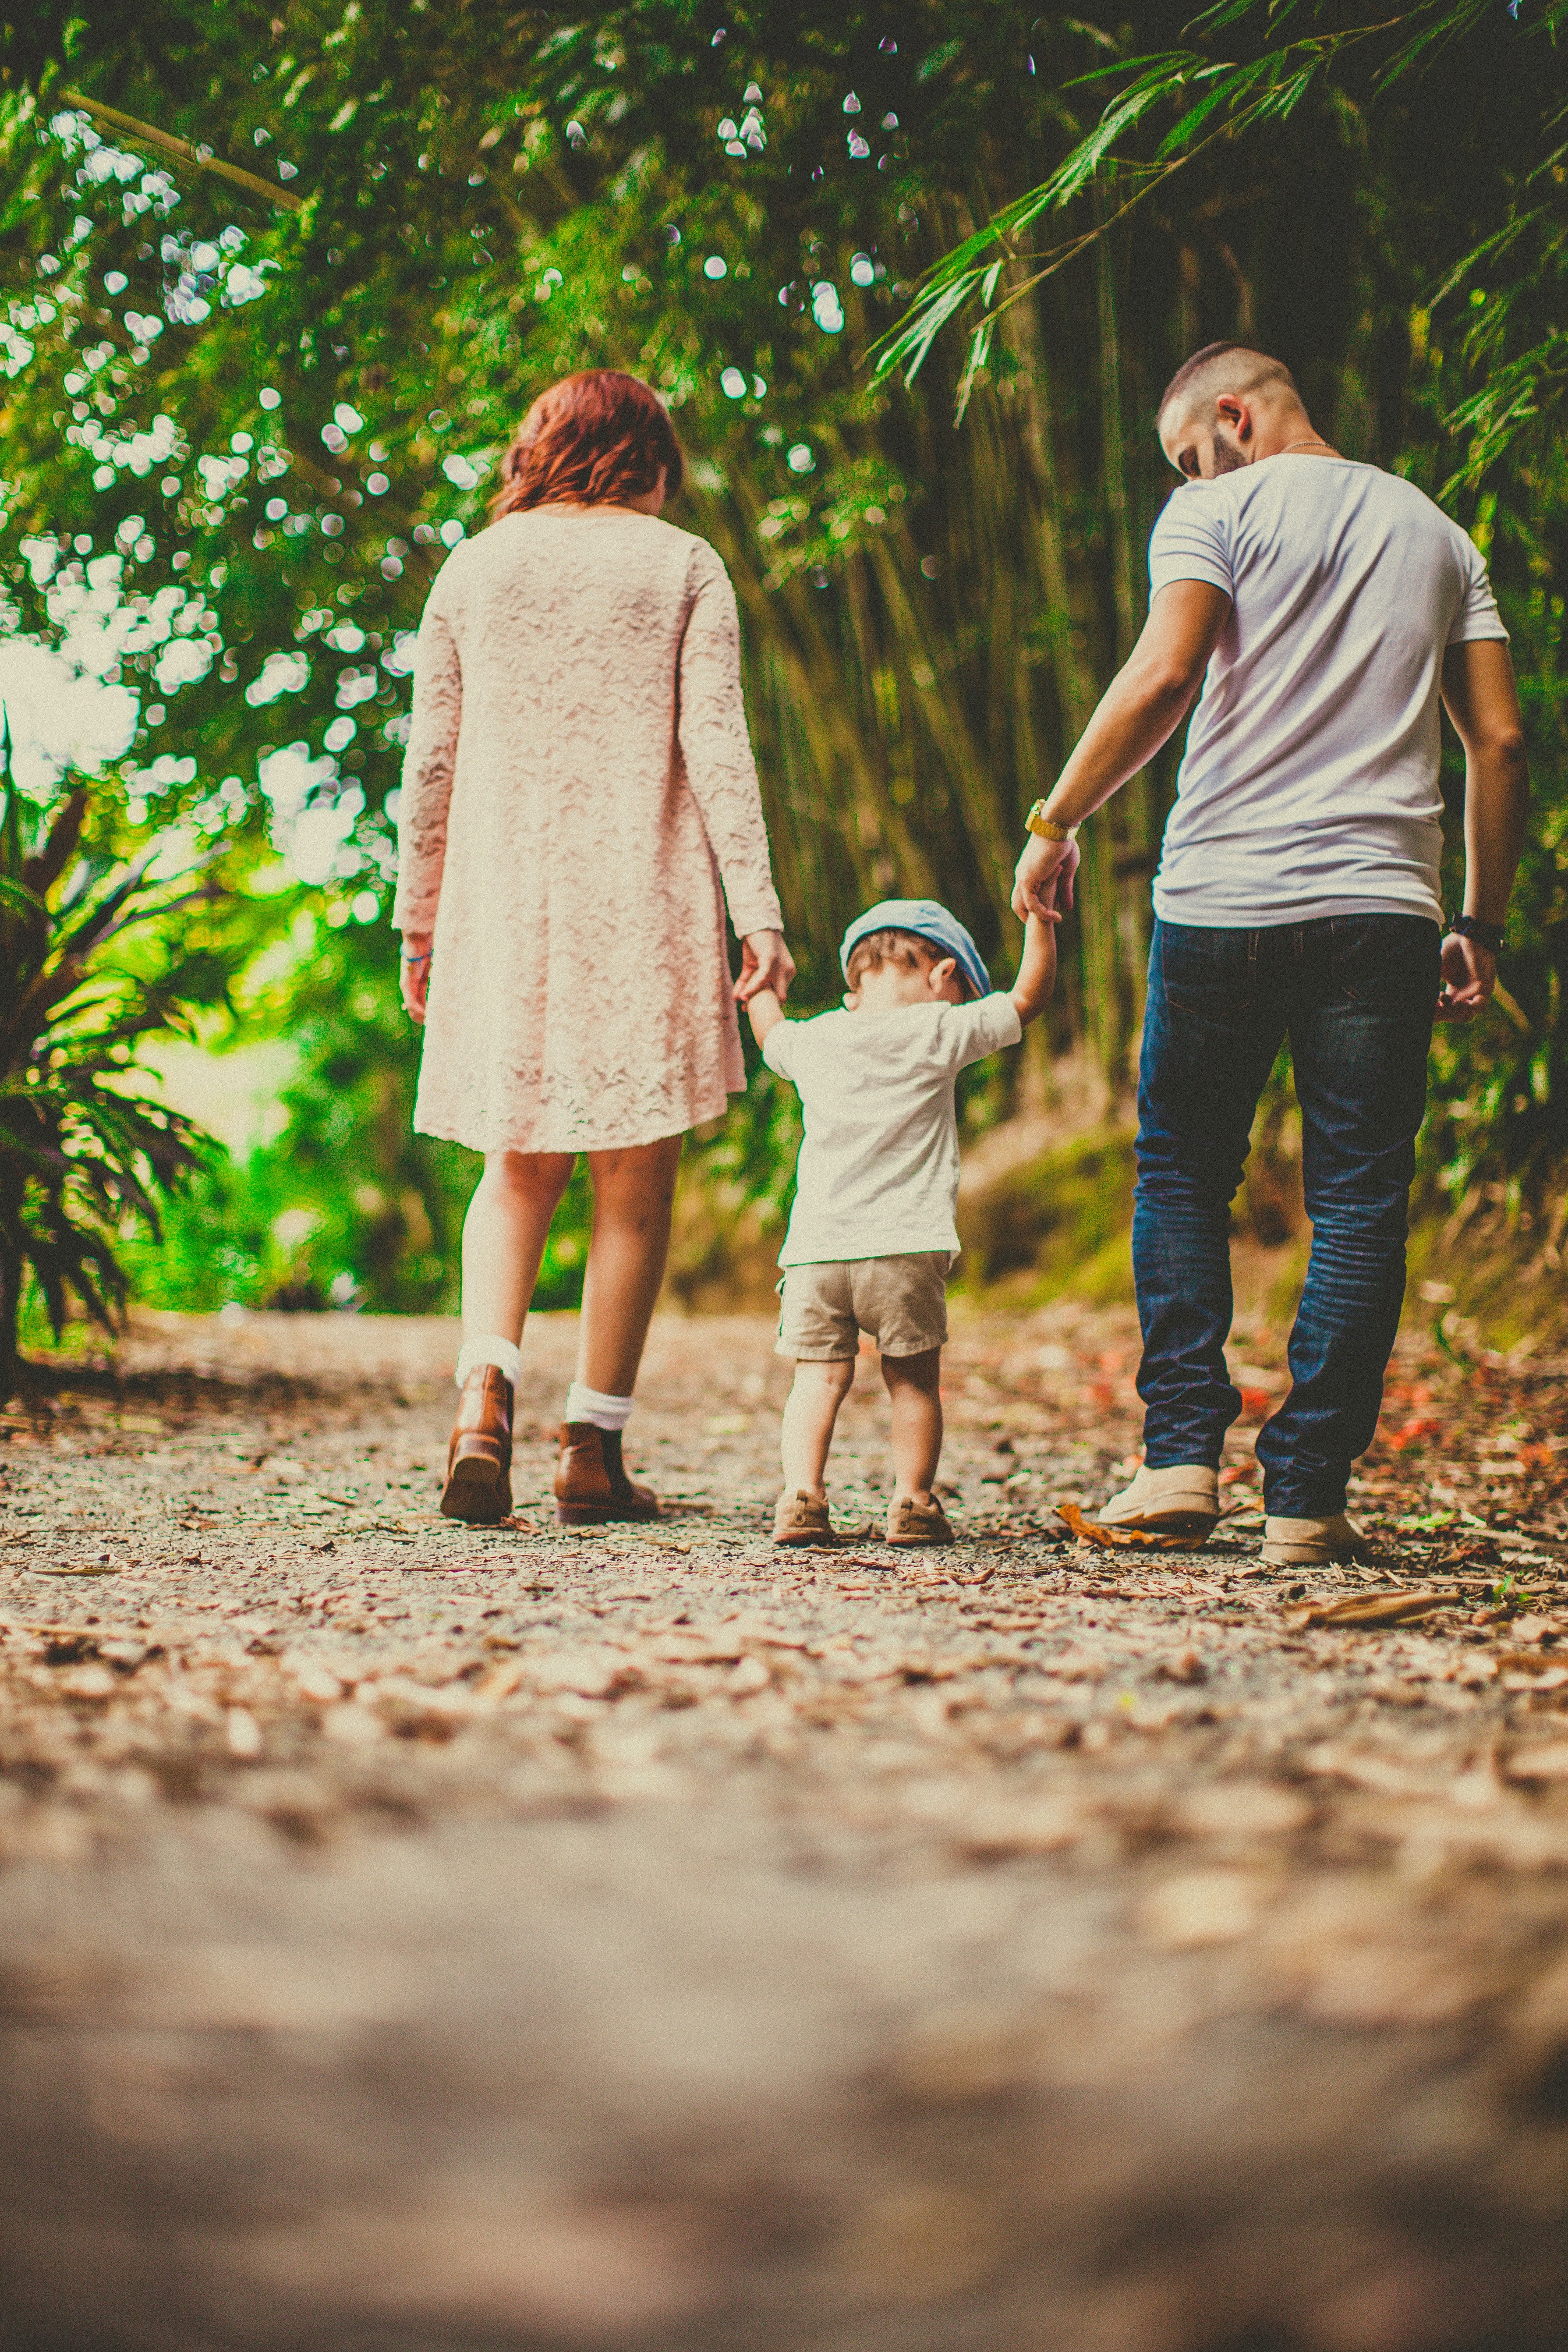 A couple with their son holding his hands on each side walking in an unpaved pathway outdoors | Source: Pexels 